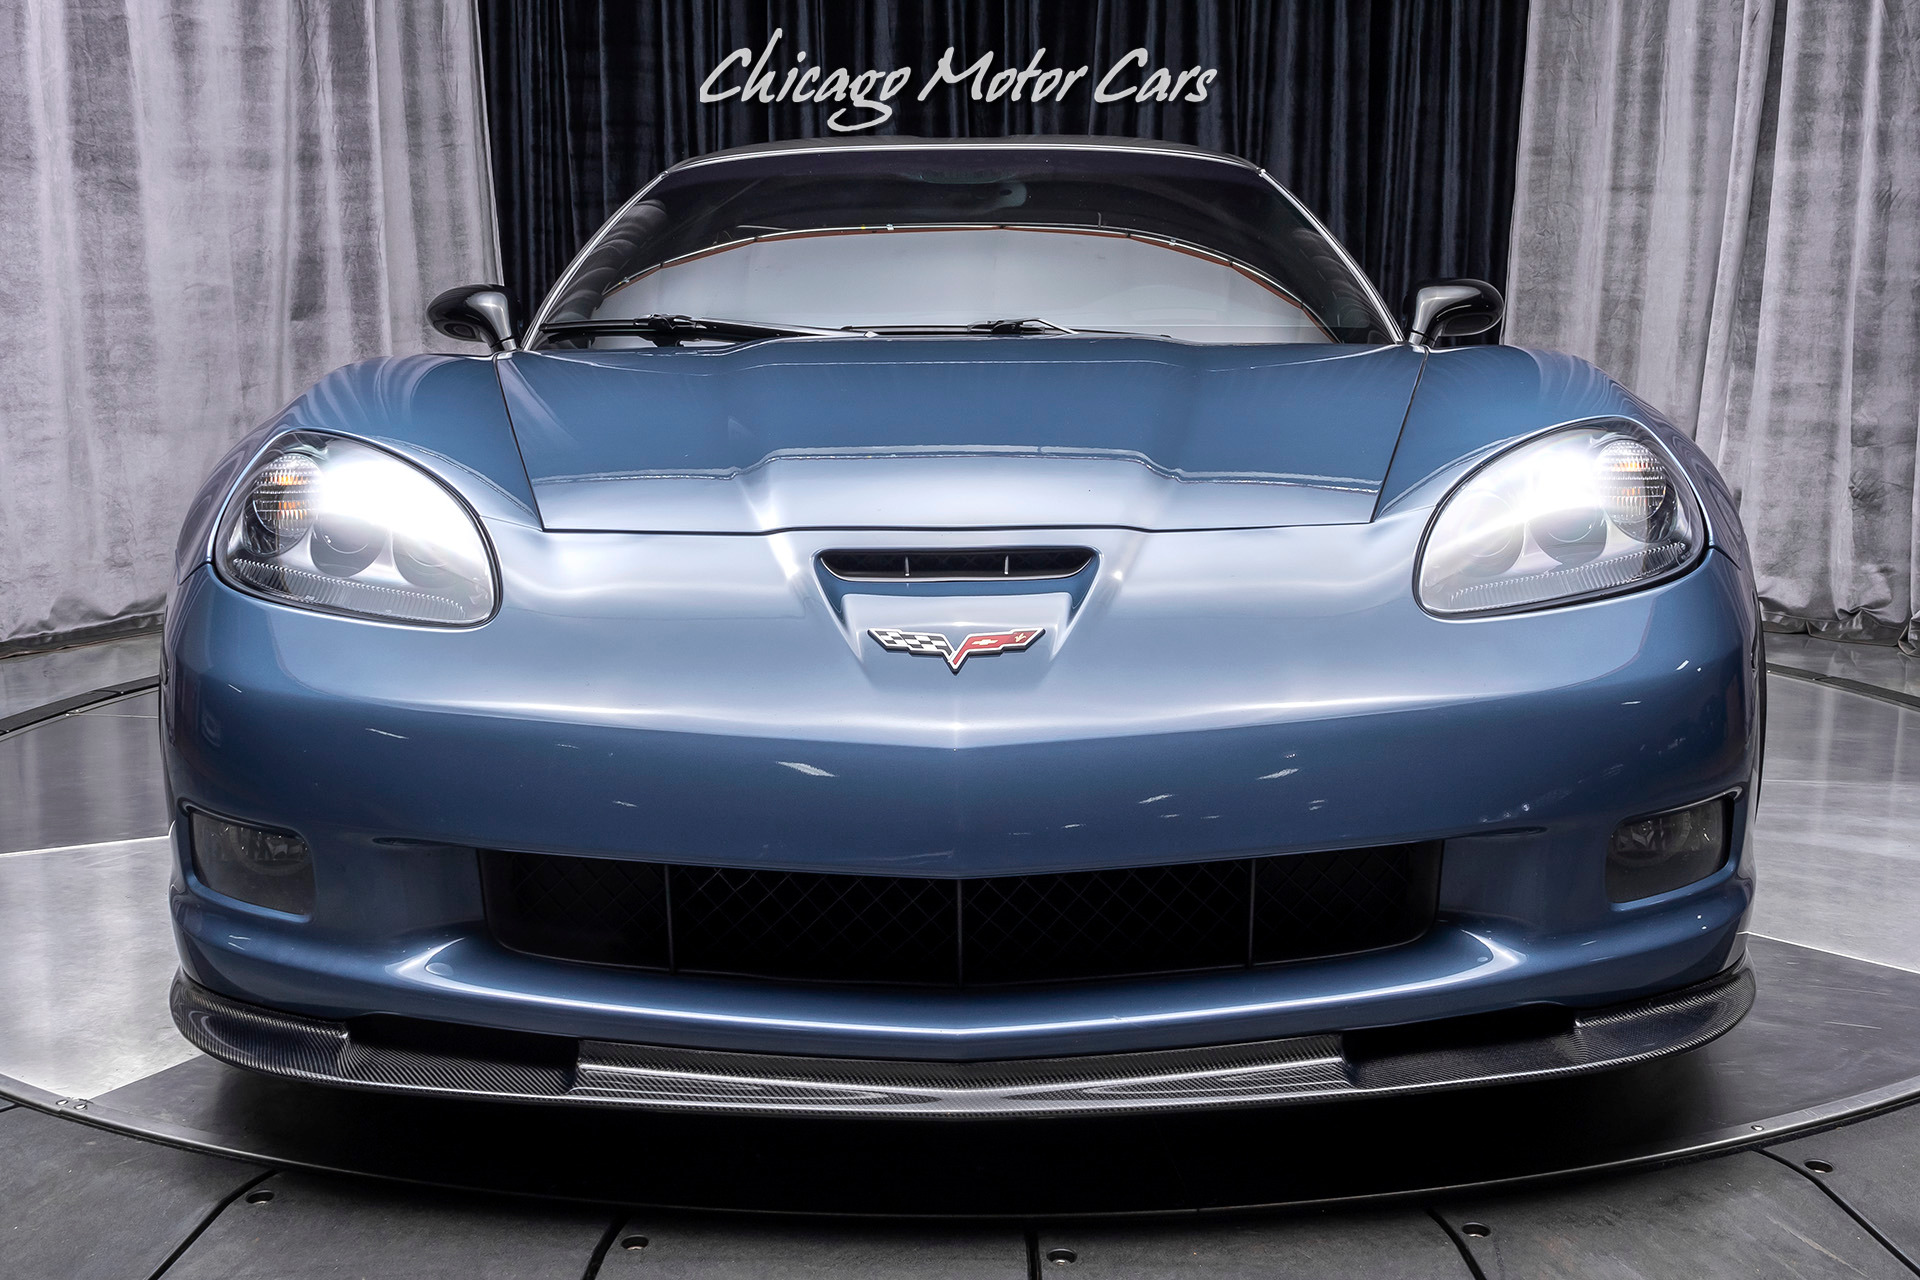 Used-2011-Chevrolet-Corvette-Z06-with-Z07-Ultimate-Performance-Package